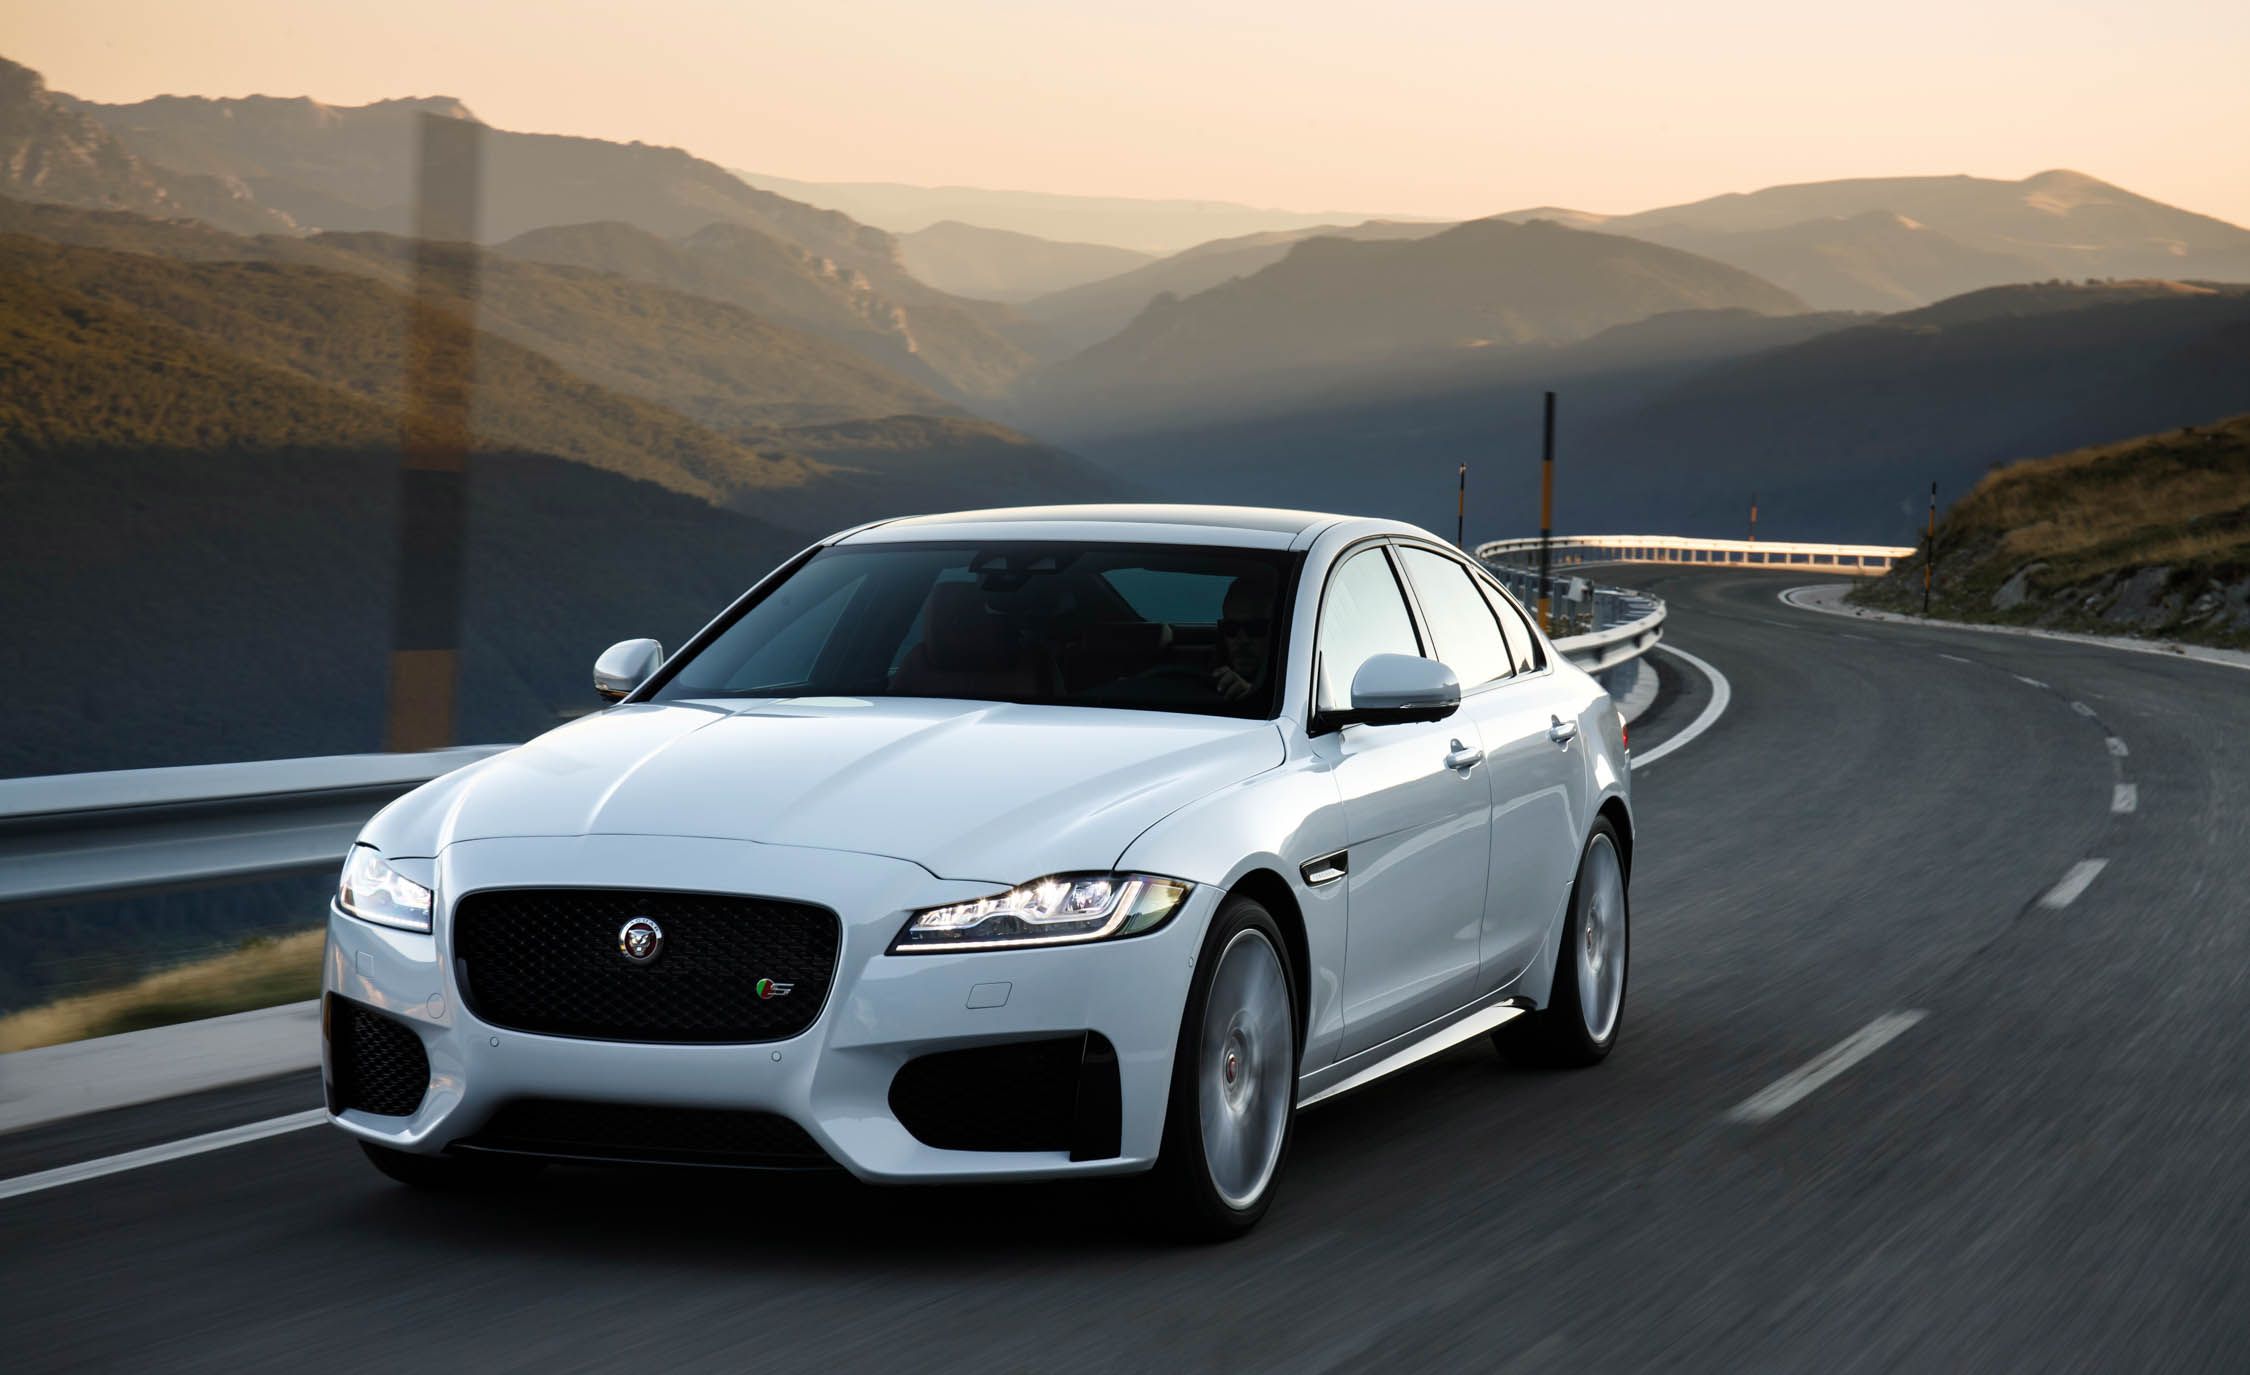 2018 Jaguar XF White Test Drive Front View (View 1 of 3)